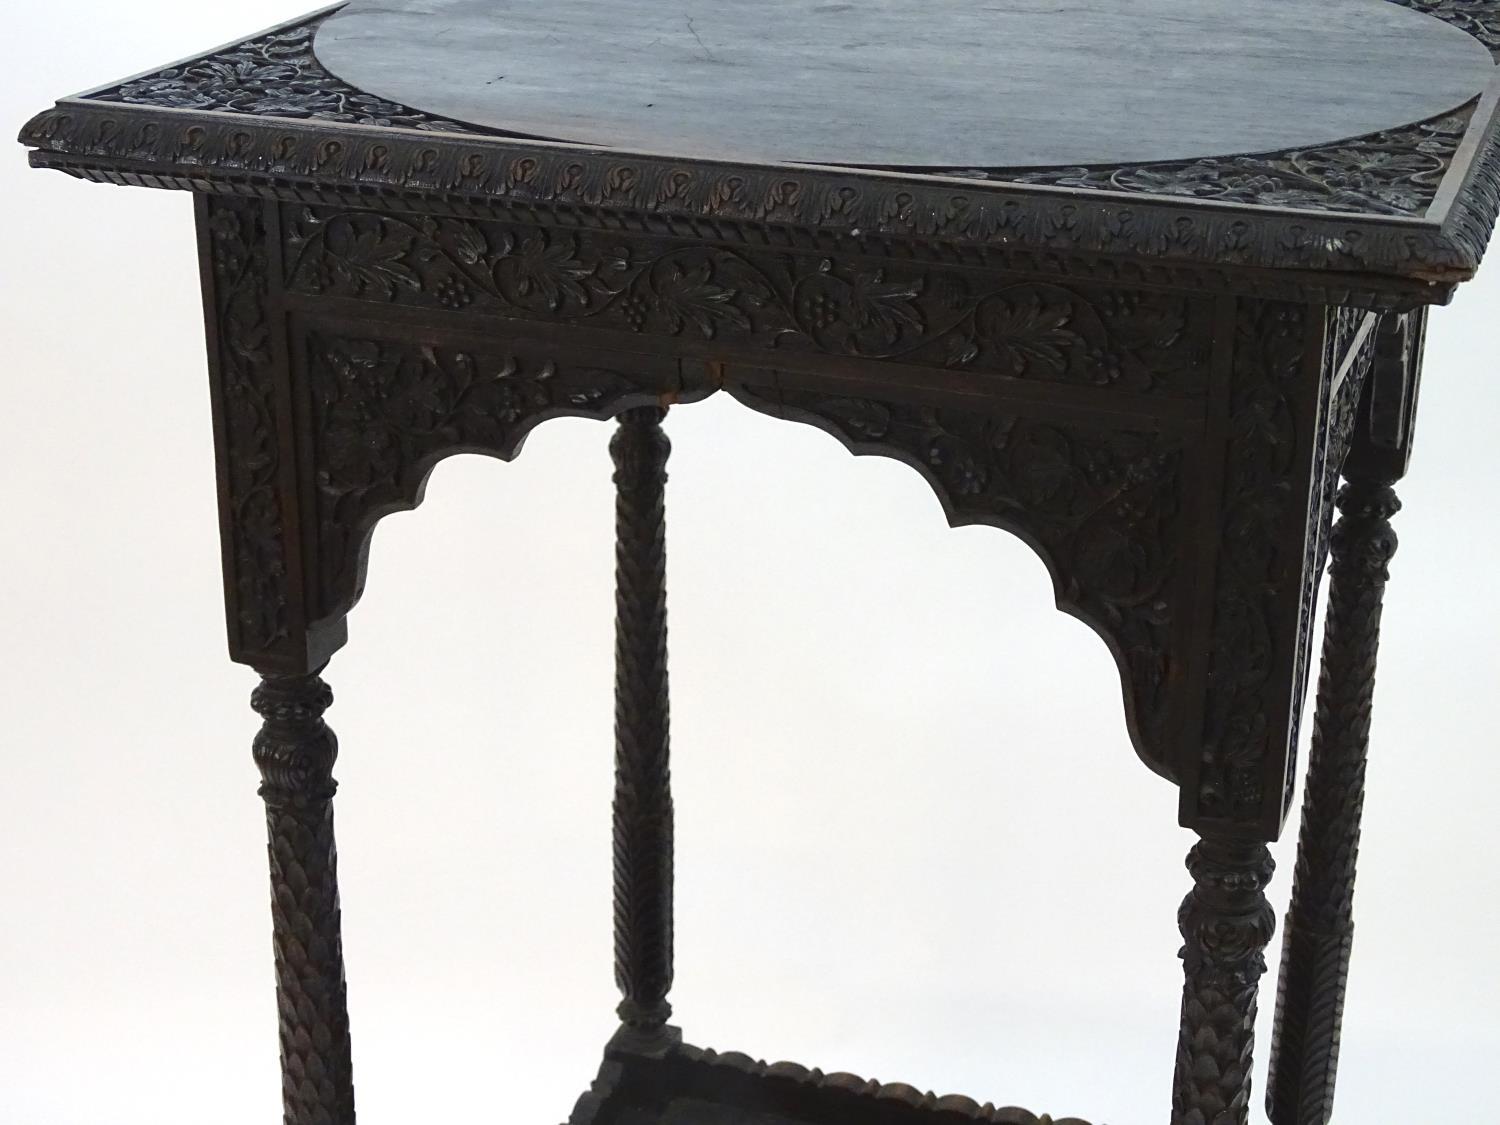 A 19thC rosewood mirror with a pierced and carved top and bottom, depicting anthemion in flower - Image 4 of 8